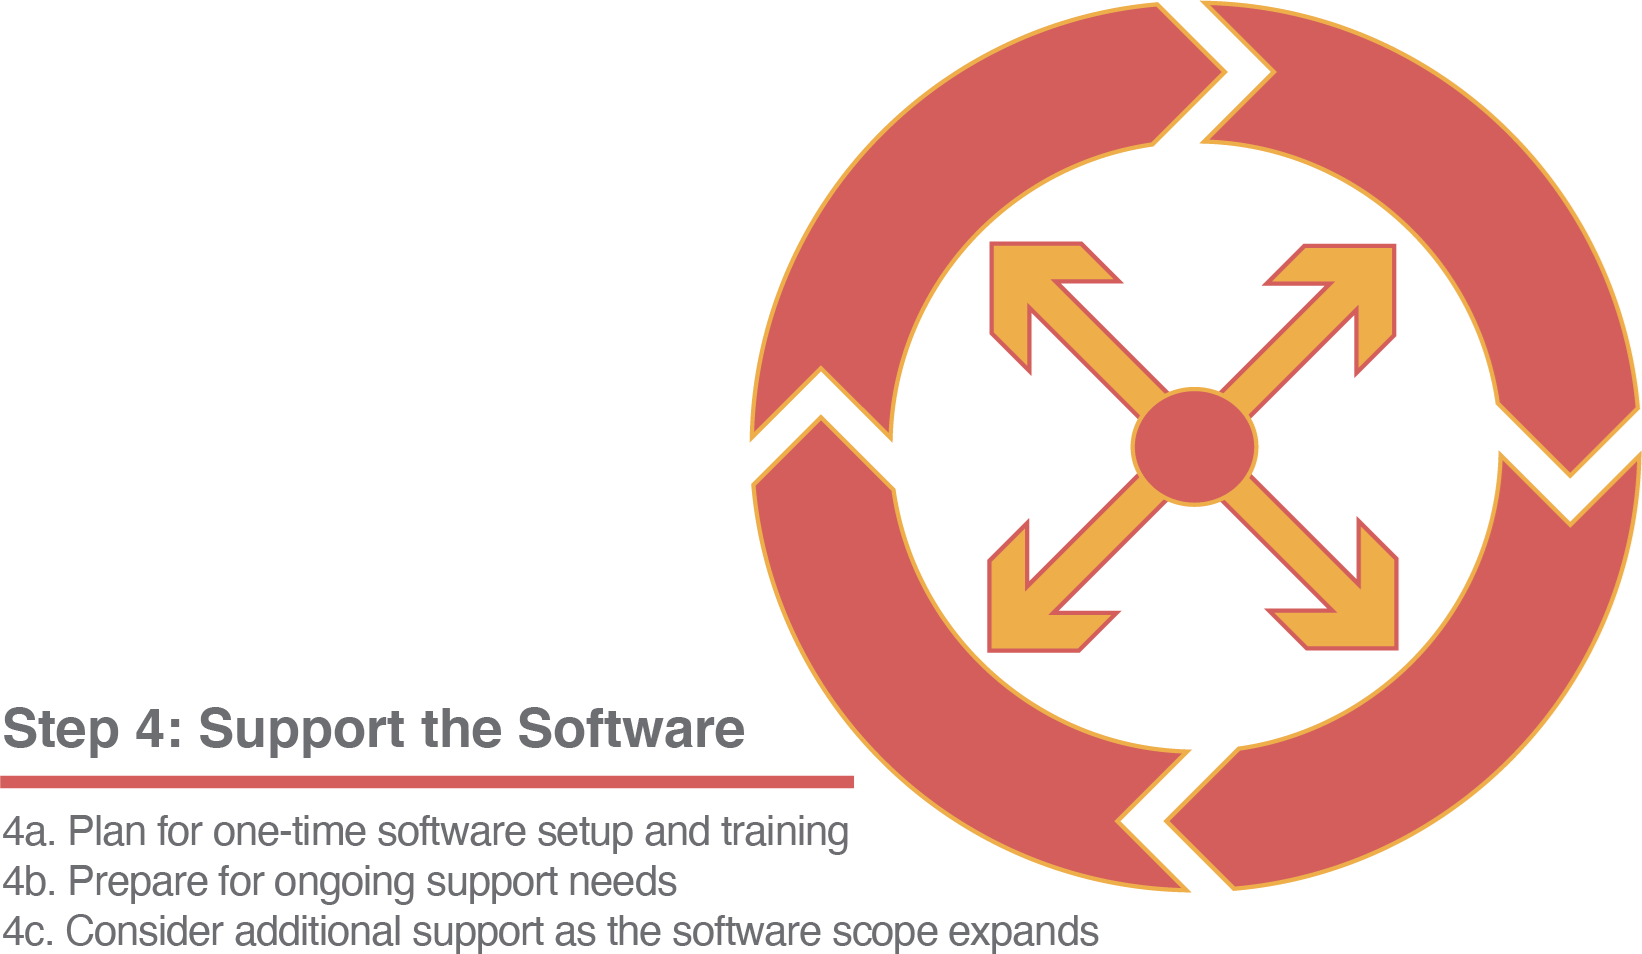 Stop 4: Support the Software